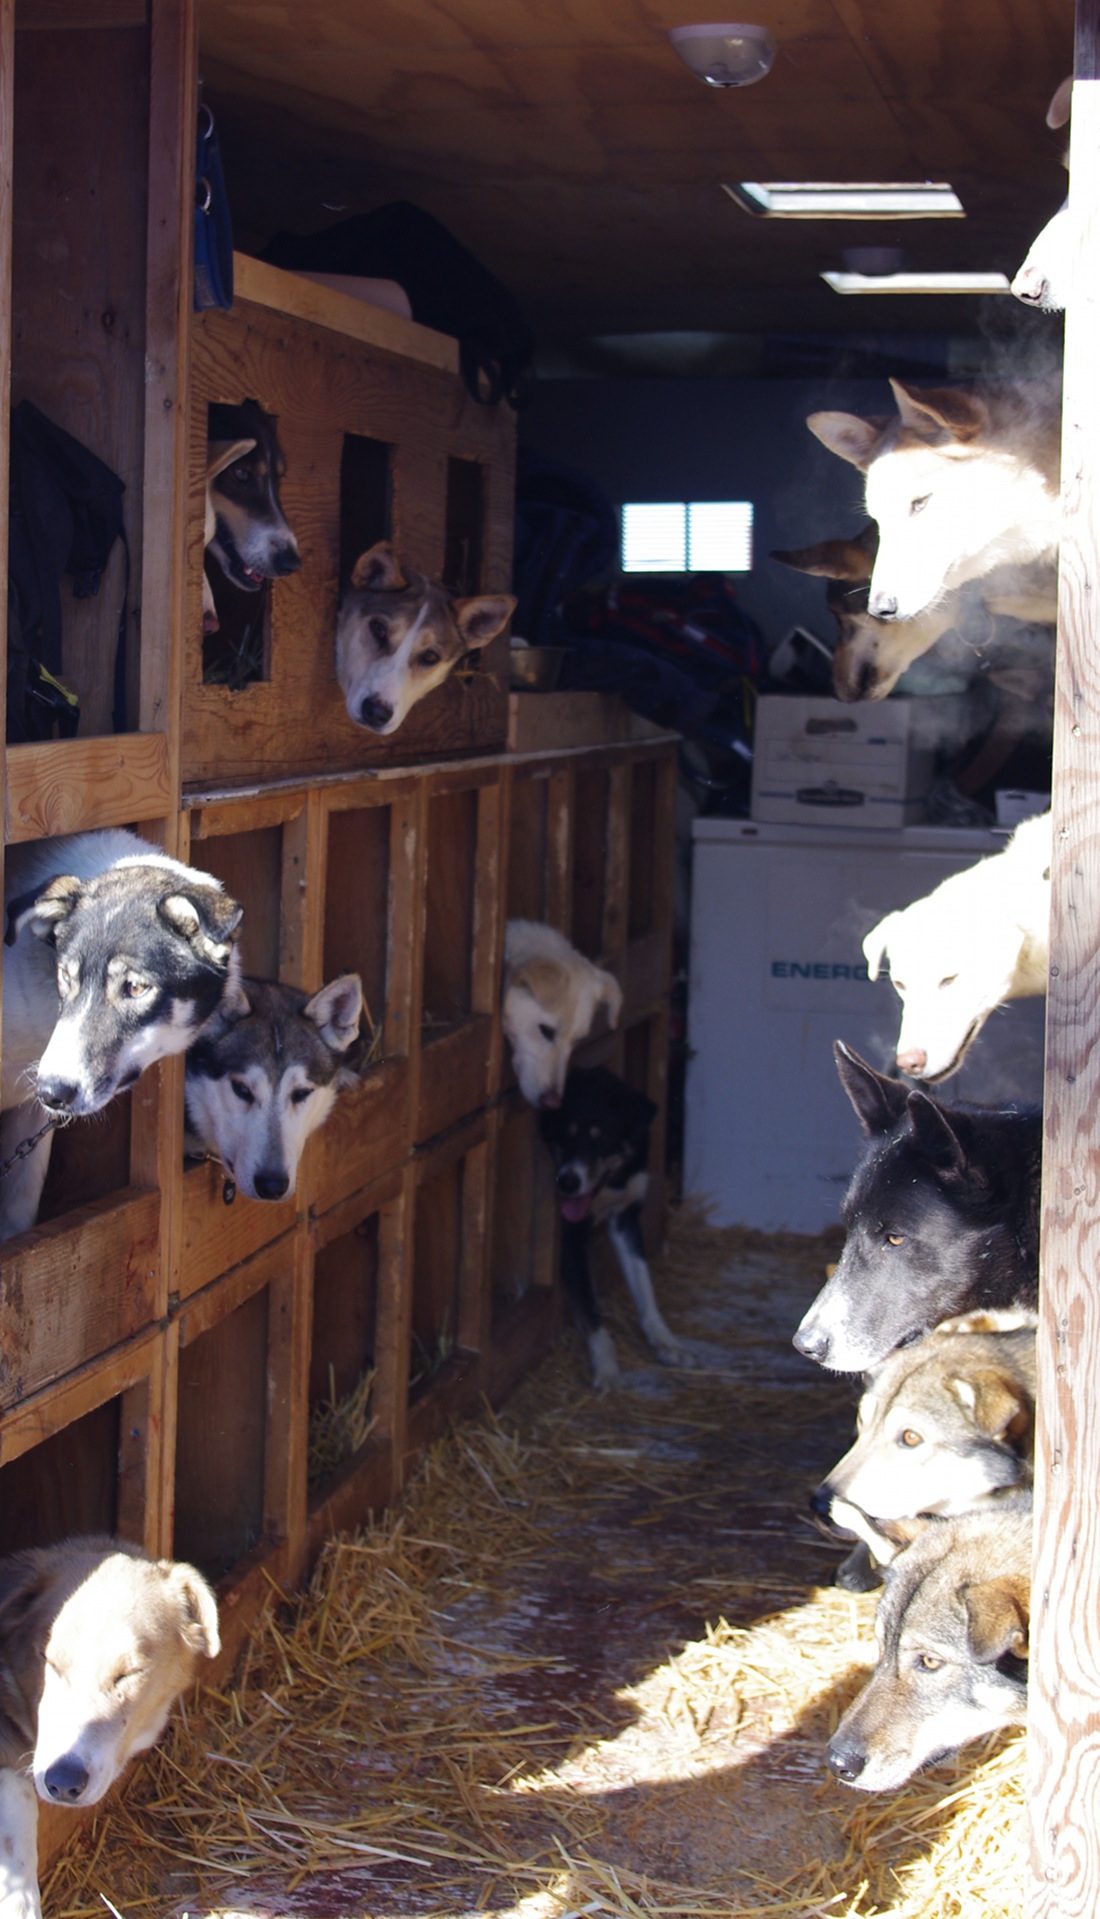 Sled dogs in a truck, from the Iditarod race, 2011.